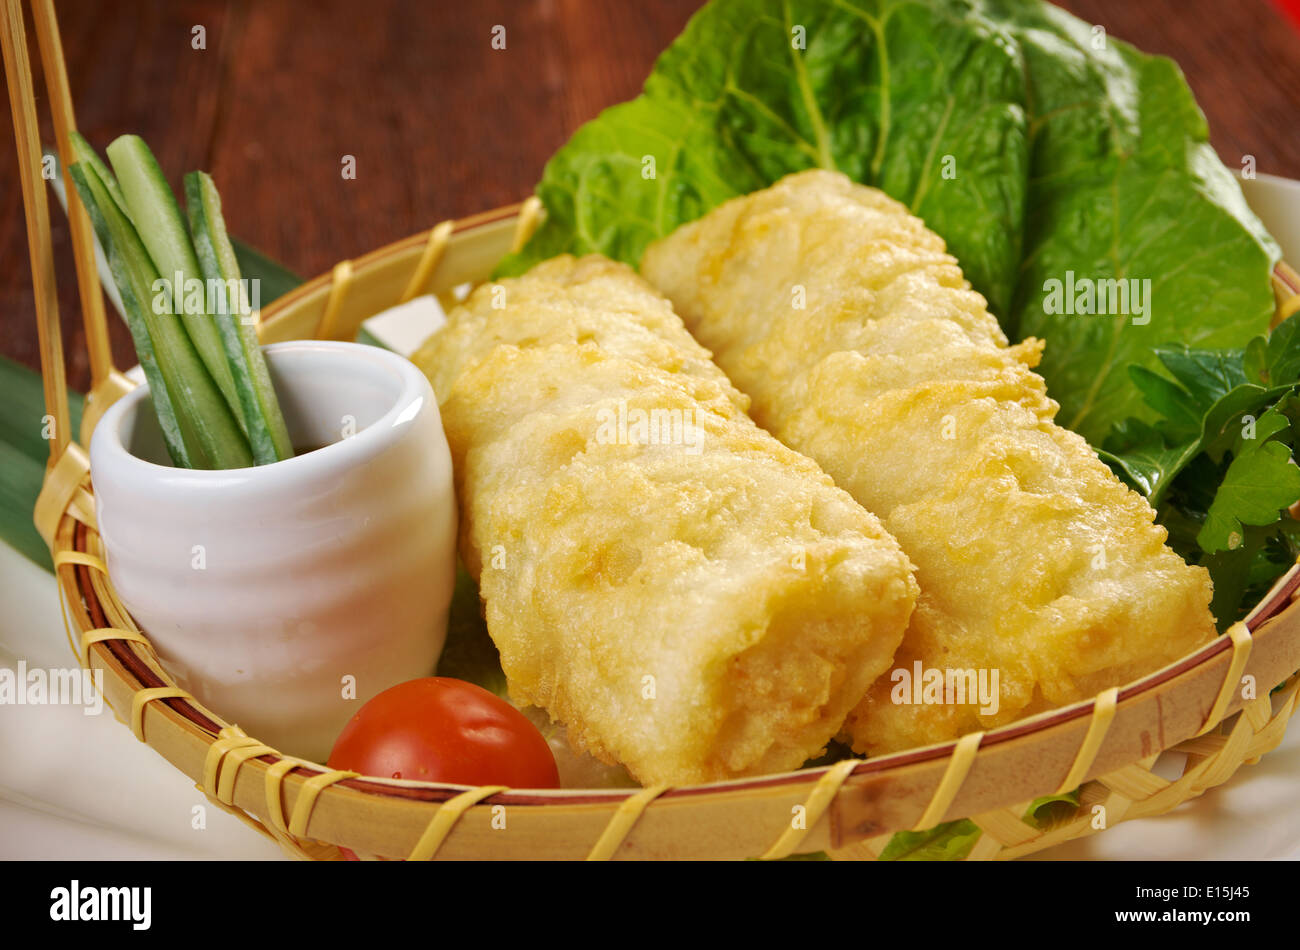 Chinese style .Banh trang - typically used in Vietnamese nem dishes. Stock Photo